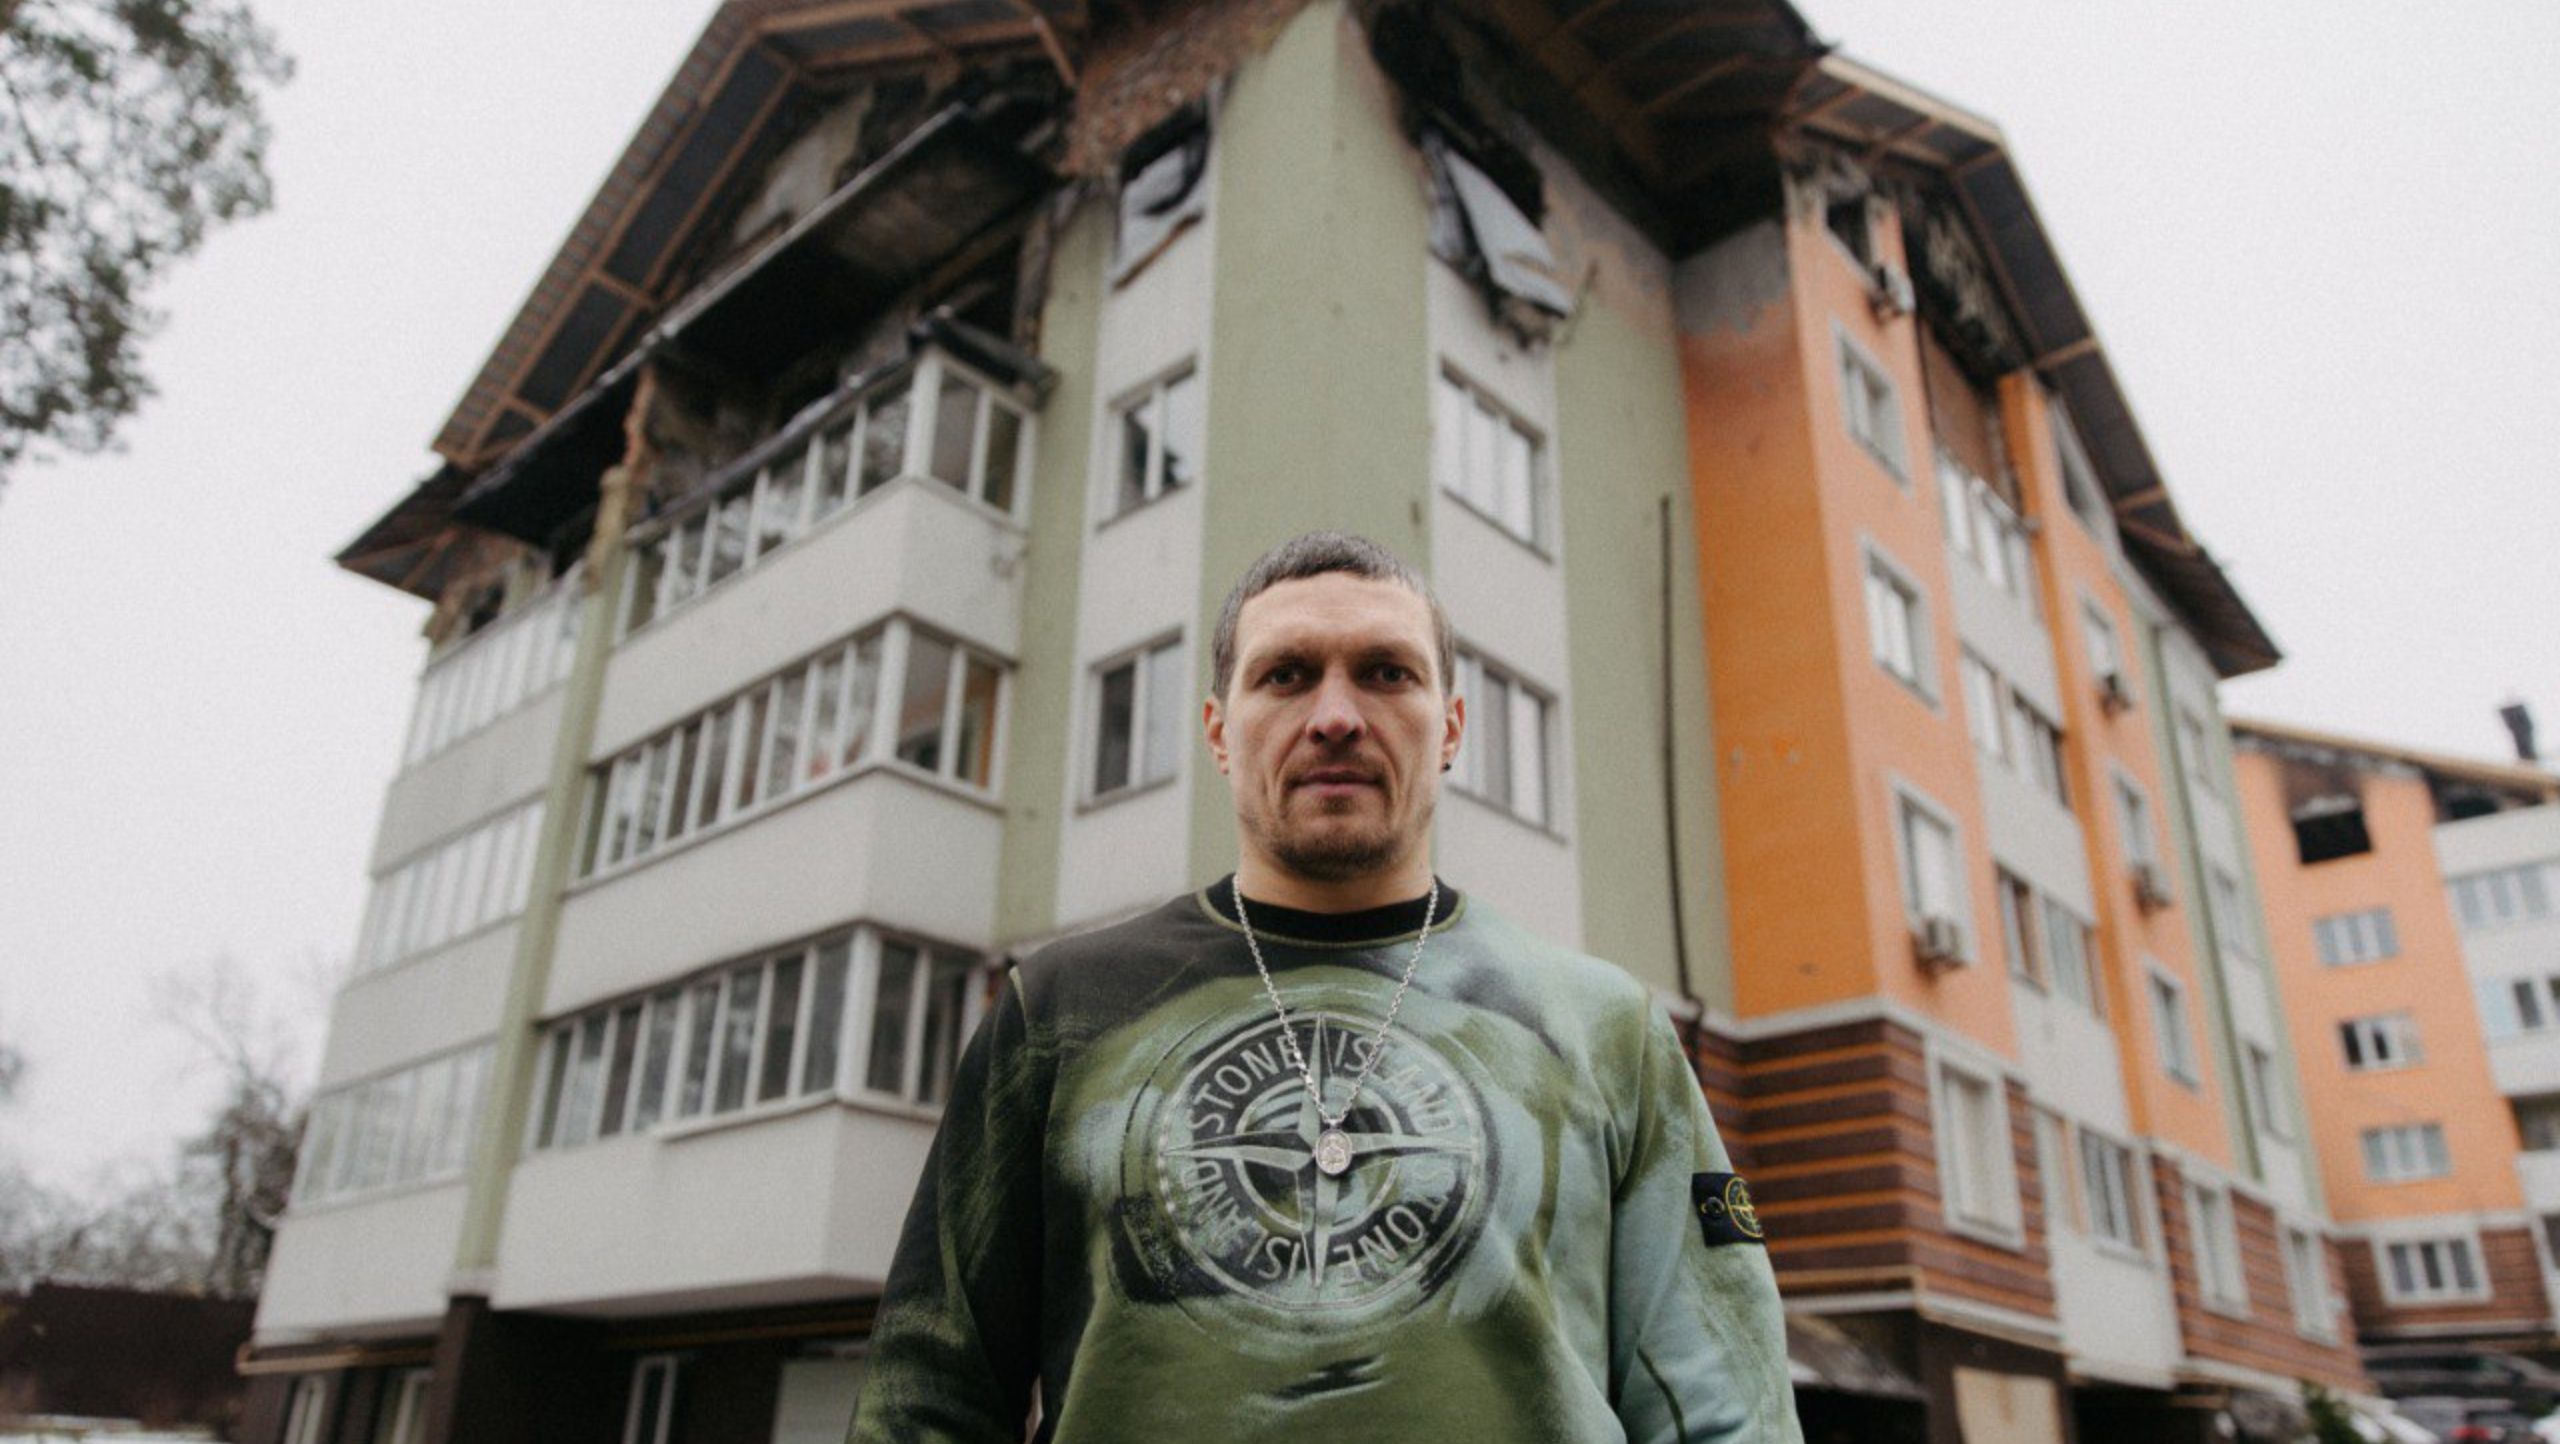 On his birthday, Oleksandr Usyk has Opened a Fundraiser to Restore an Apartment Building in Irpin